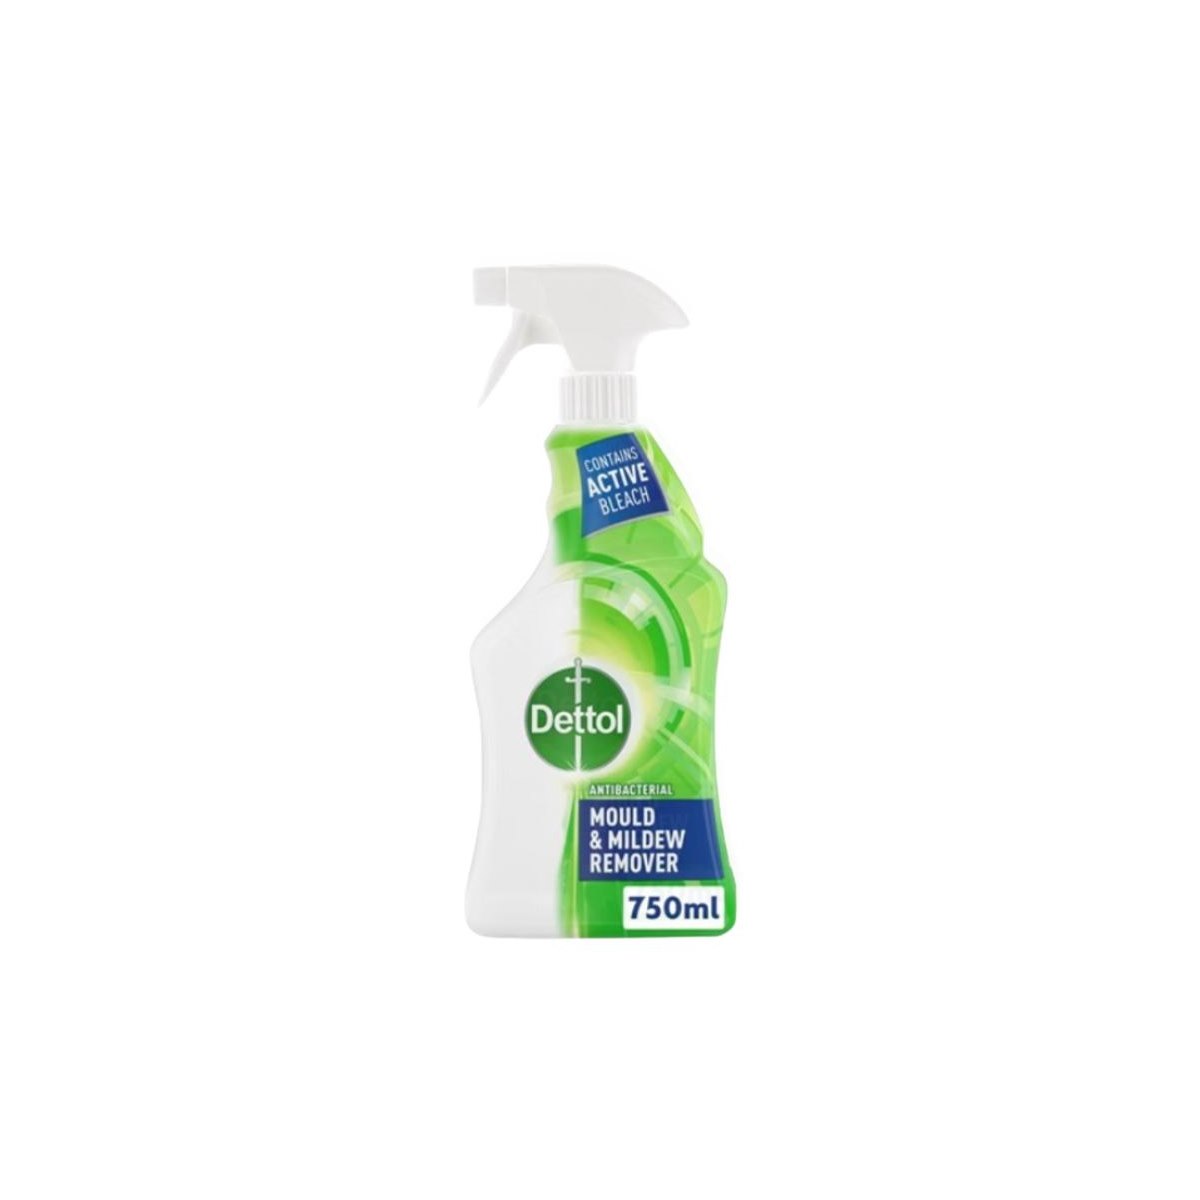 Dettol Antibacterial Mould and Mildew Remover 750ml